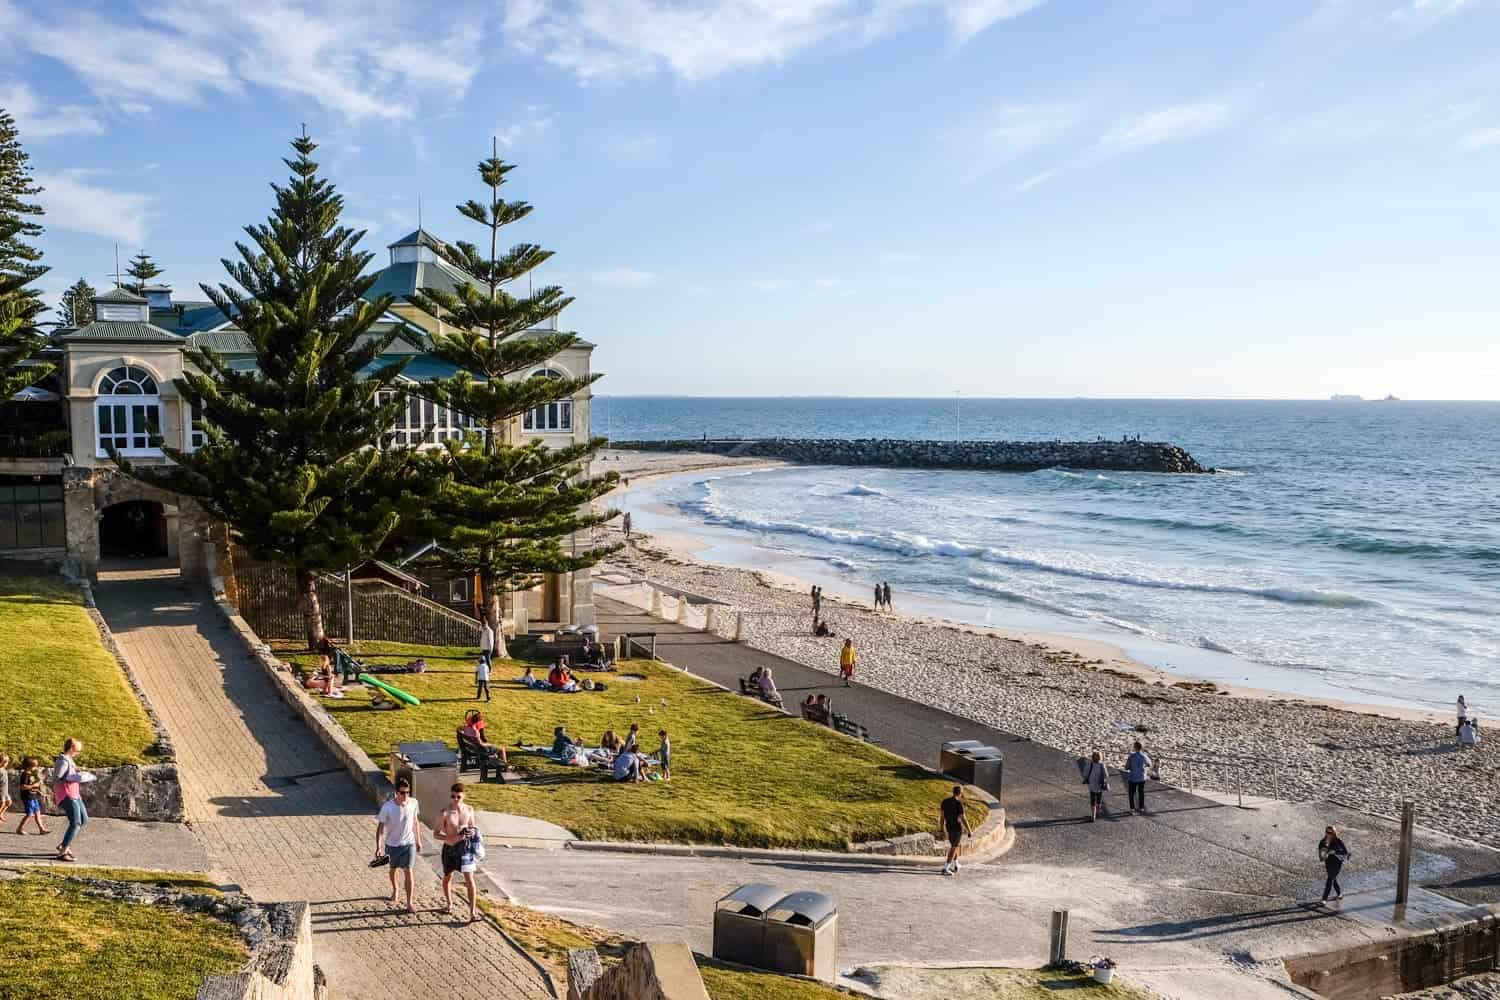 Pathways and trees run parallel to the sandy shores and blue waters of Cottesloe Beach in Perth